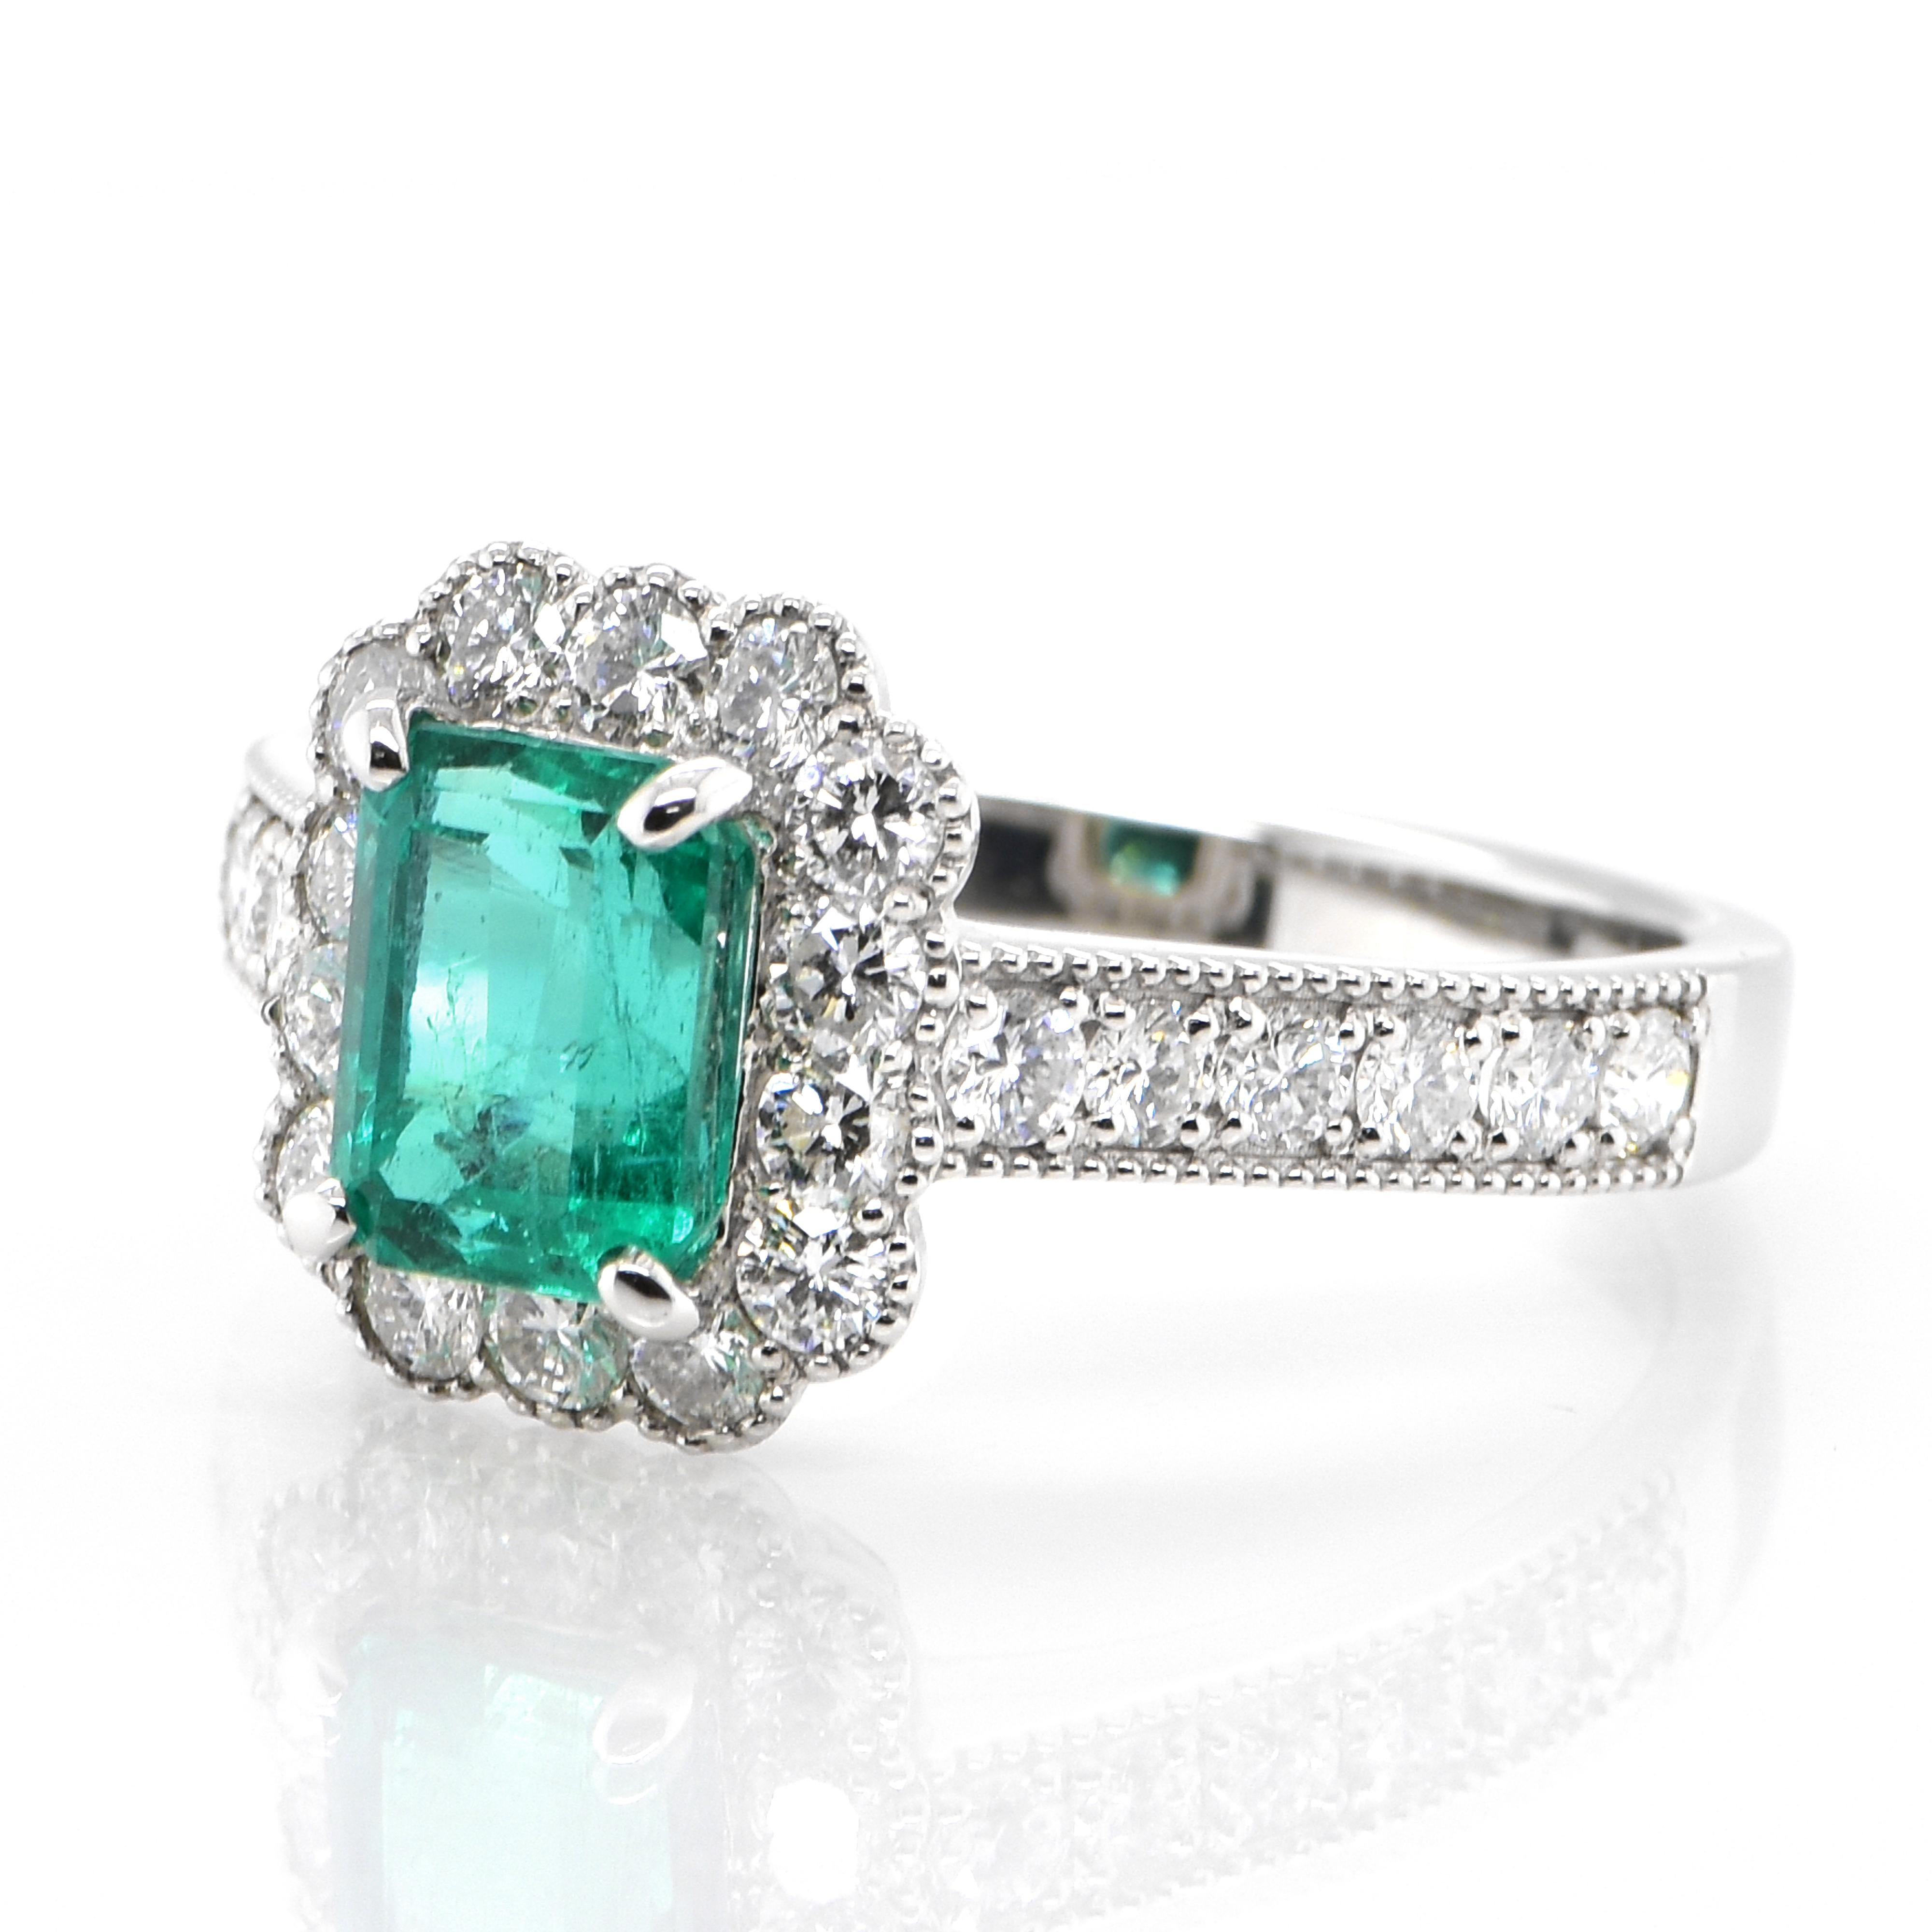 A stunning ring featuring a 1.47 Carat Natural Emerald and 0.83 Carats of Diamond Accents set in Platinum. People have admired emerald’s green for thousands of years. Emeralds have always been associated with the lushest landscapes and the richest